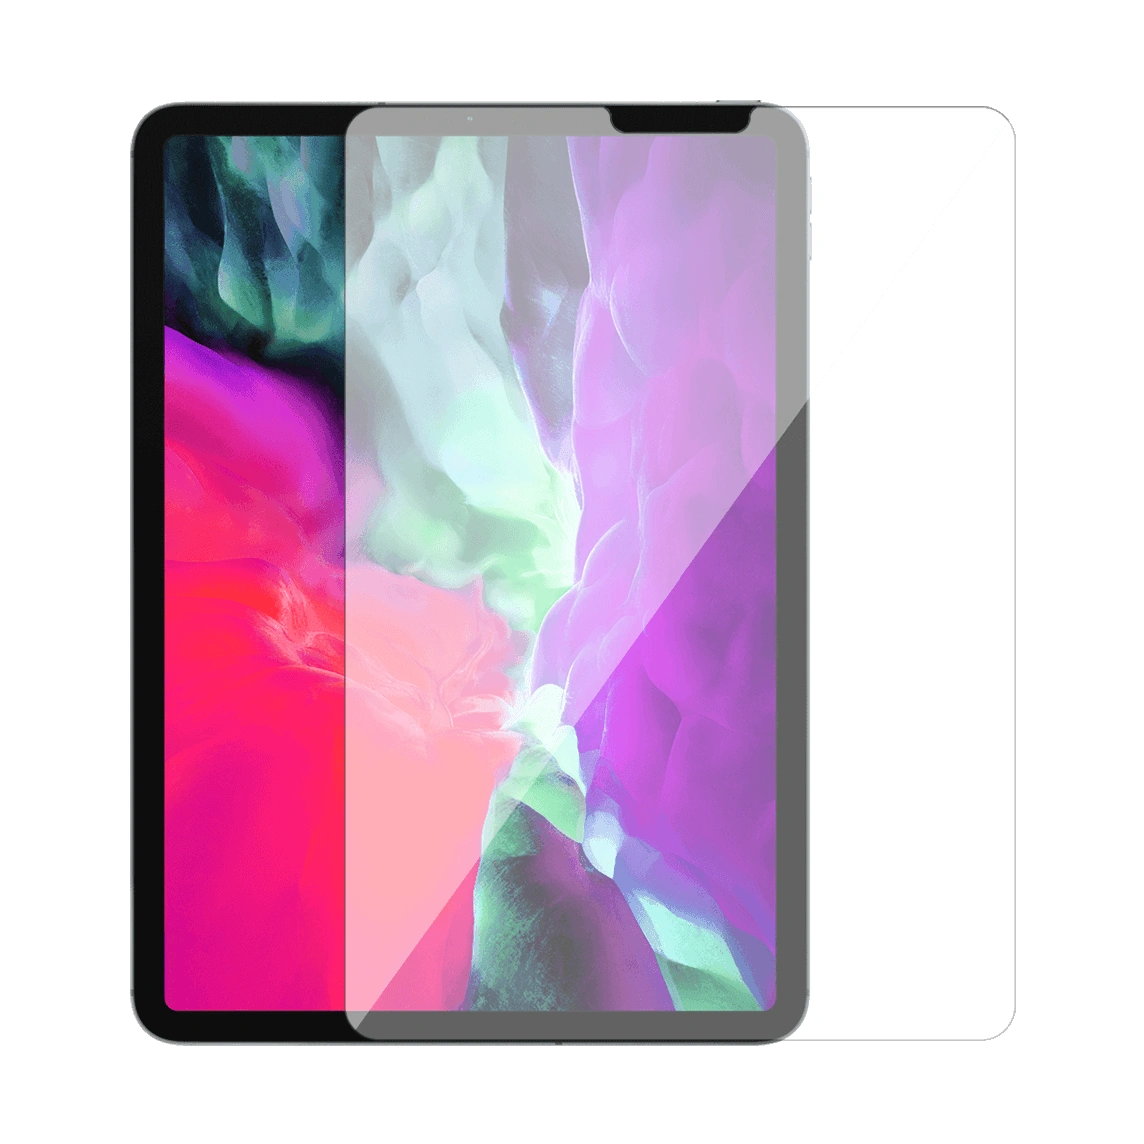 screen-protector-for-ipad-12-9-inch